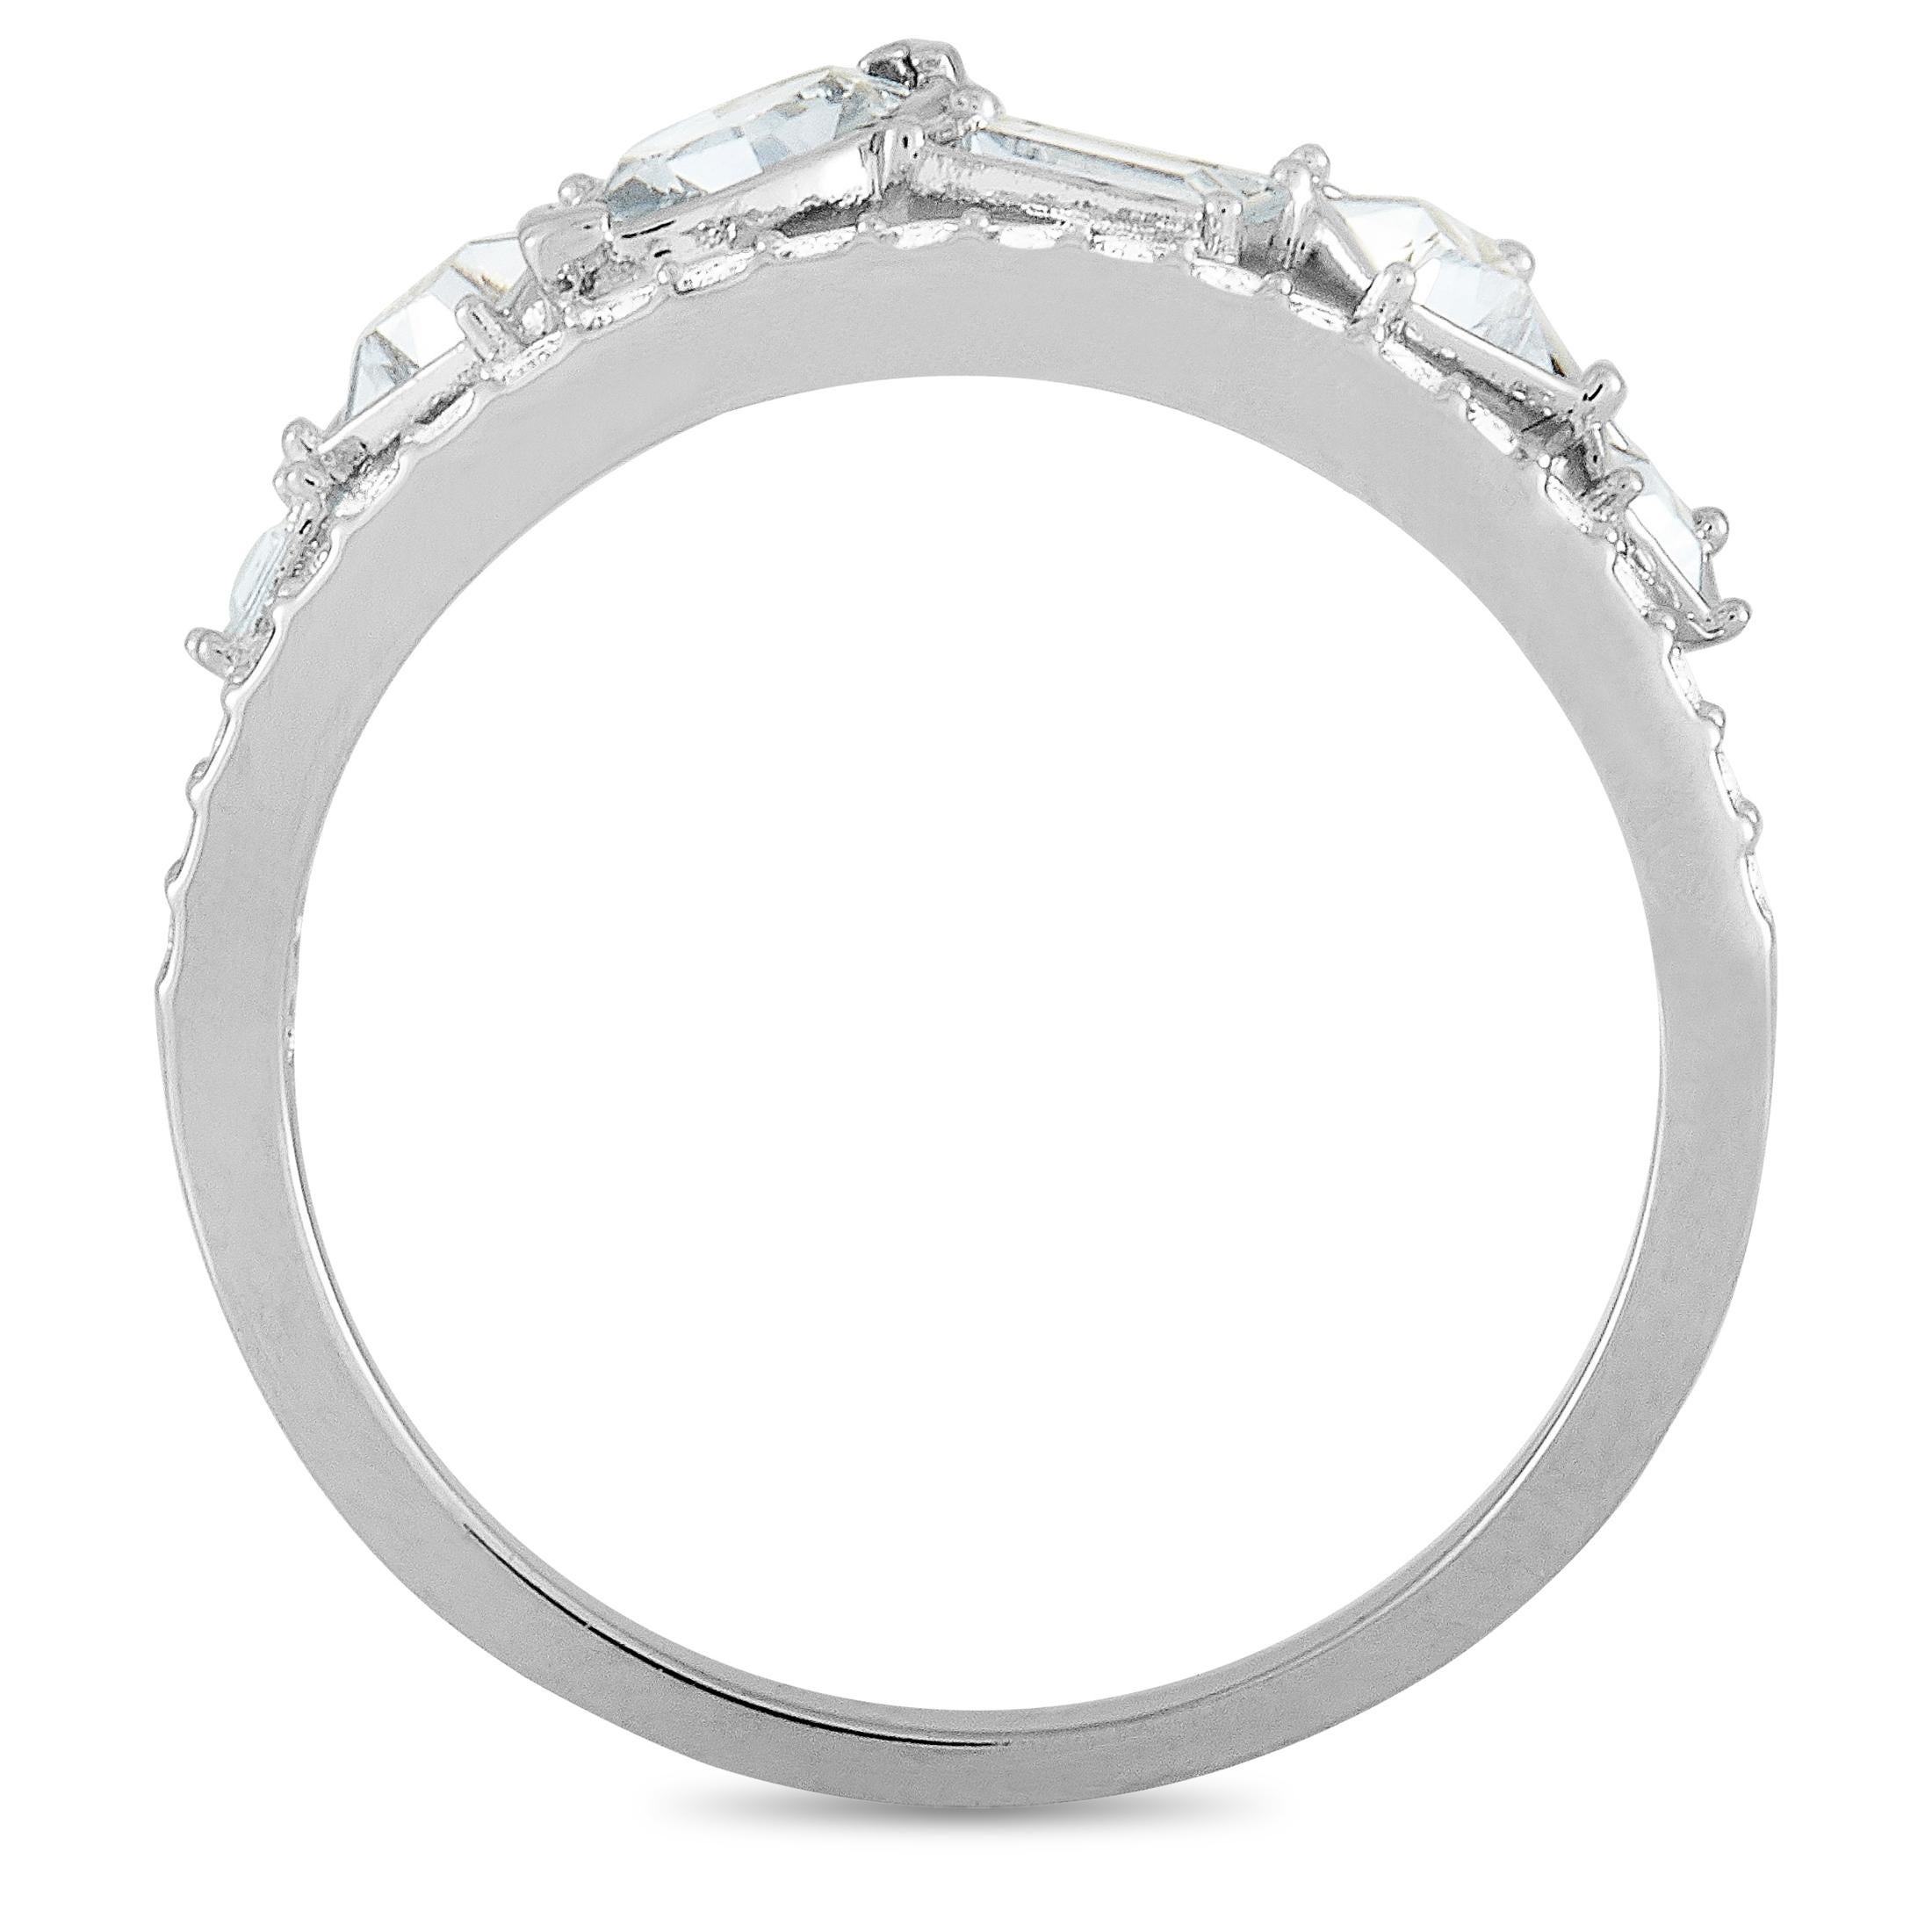 The Swarovski “Henrietta” ring is made out of rhodium-plated stainless steel and clear Swarovski crystals and weighs 2.3 grams. The ring boasts band thickness of 1 mm and top height of 3 mm, while top dimensions measure 20 by 6 mm.